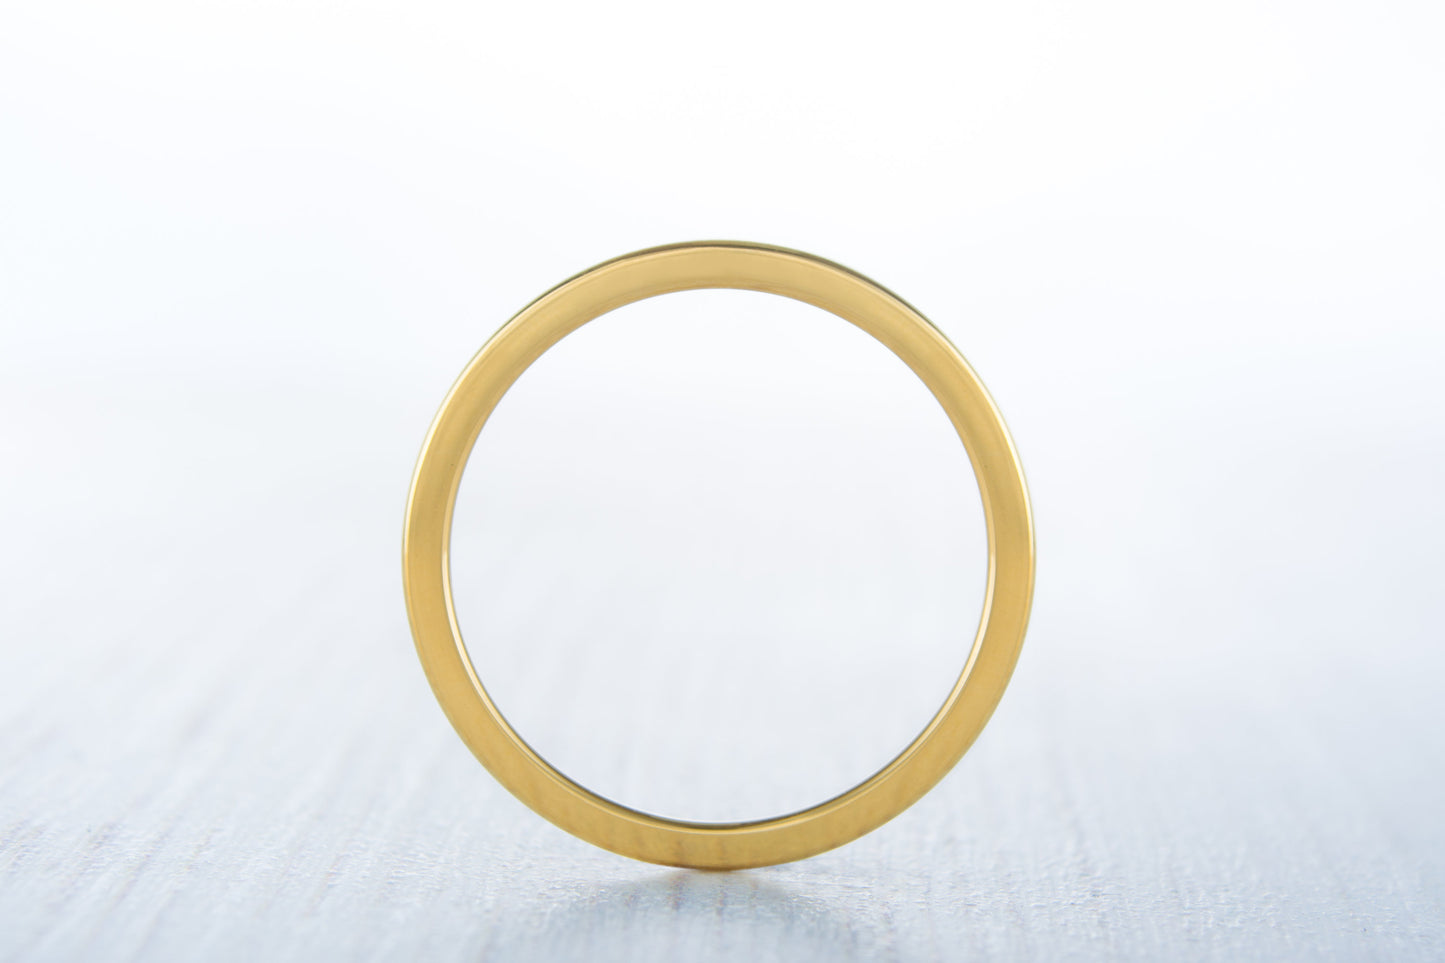 1mm Wide, filled 18ct Yellow gold Plain Wedding band Ring - gold ring